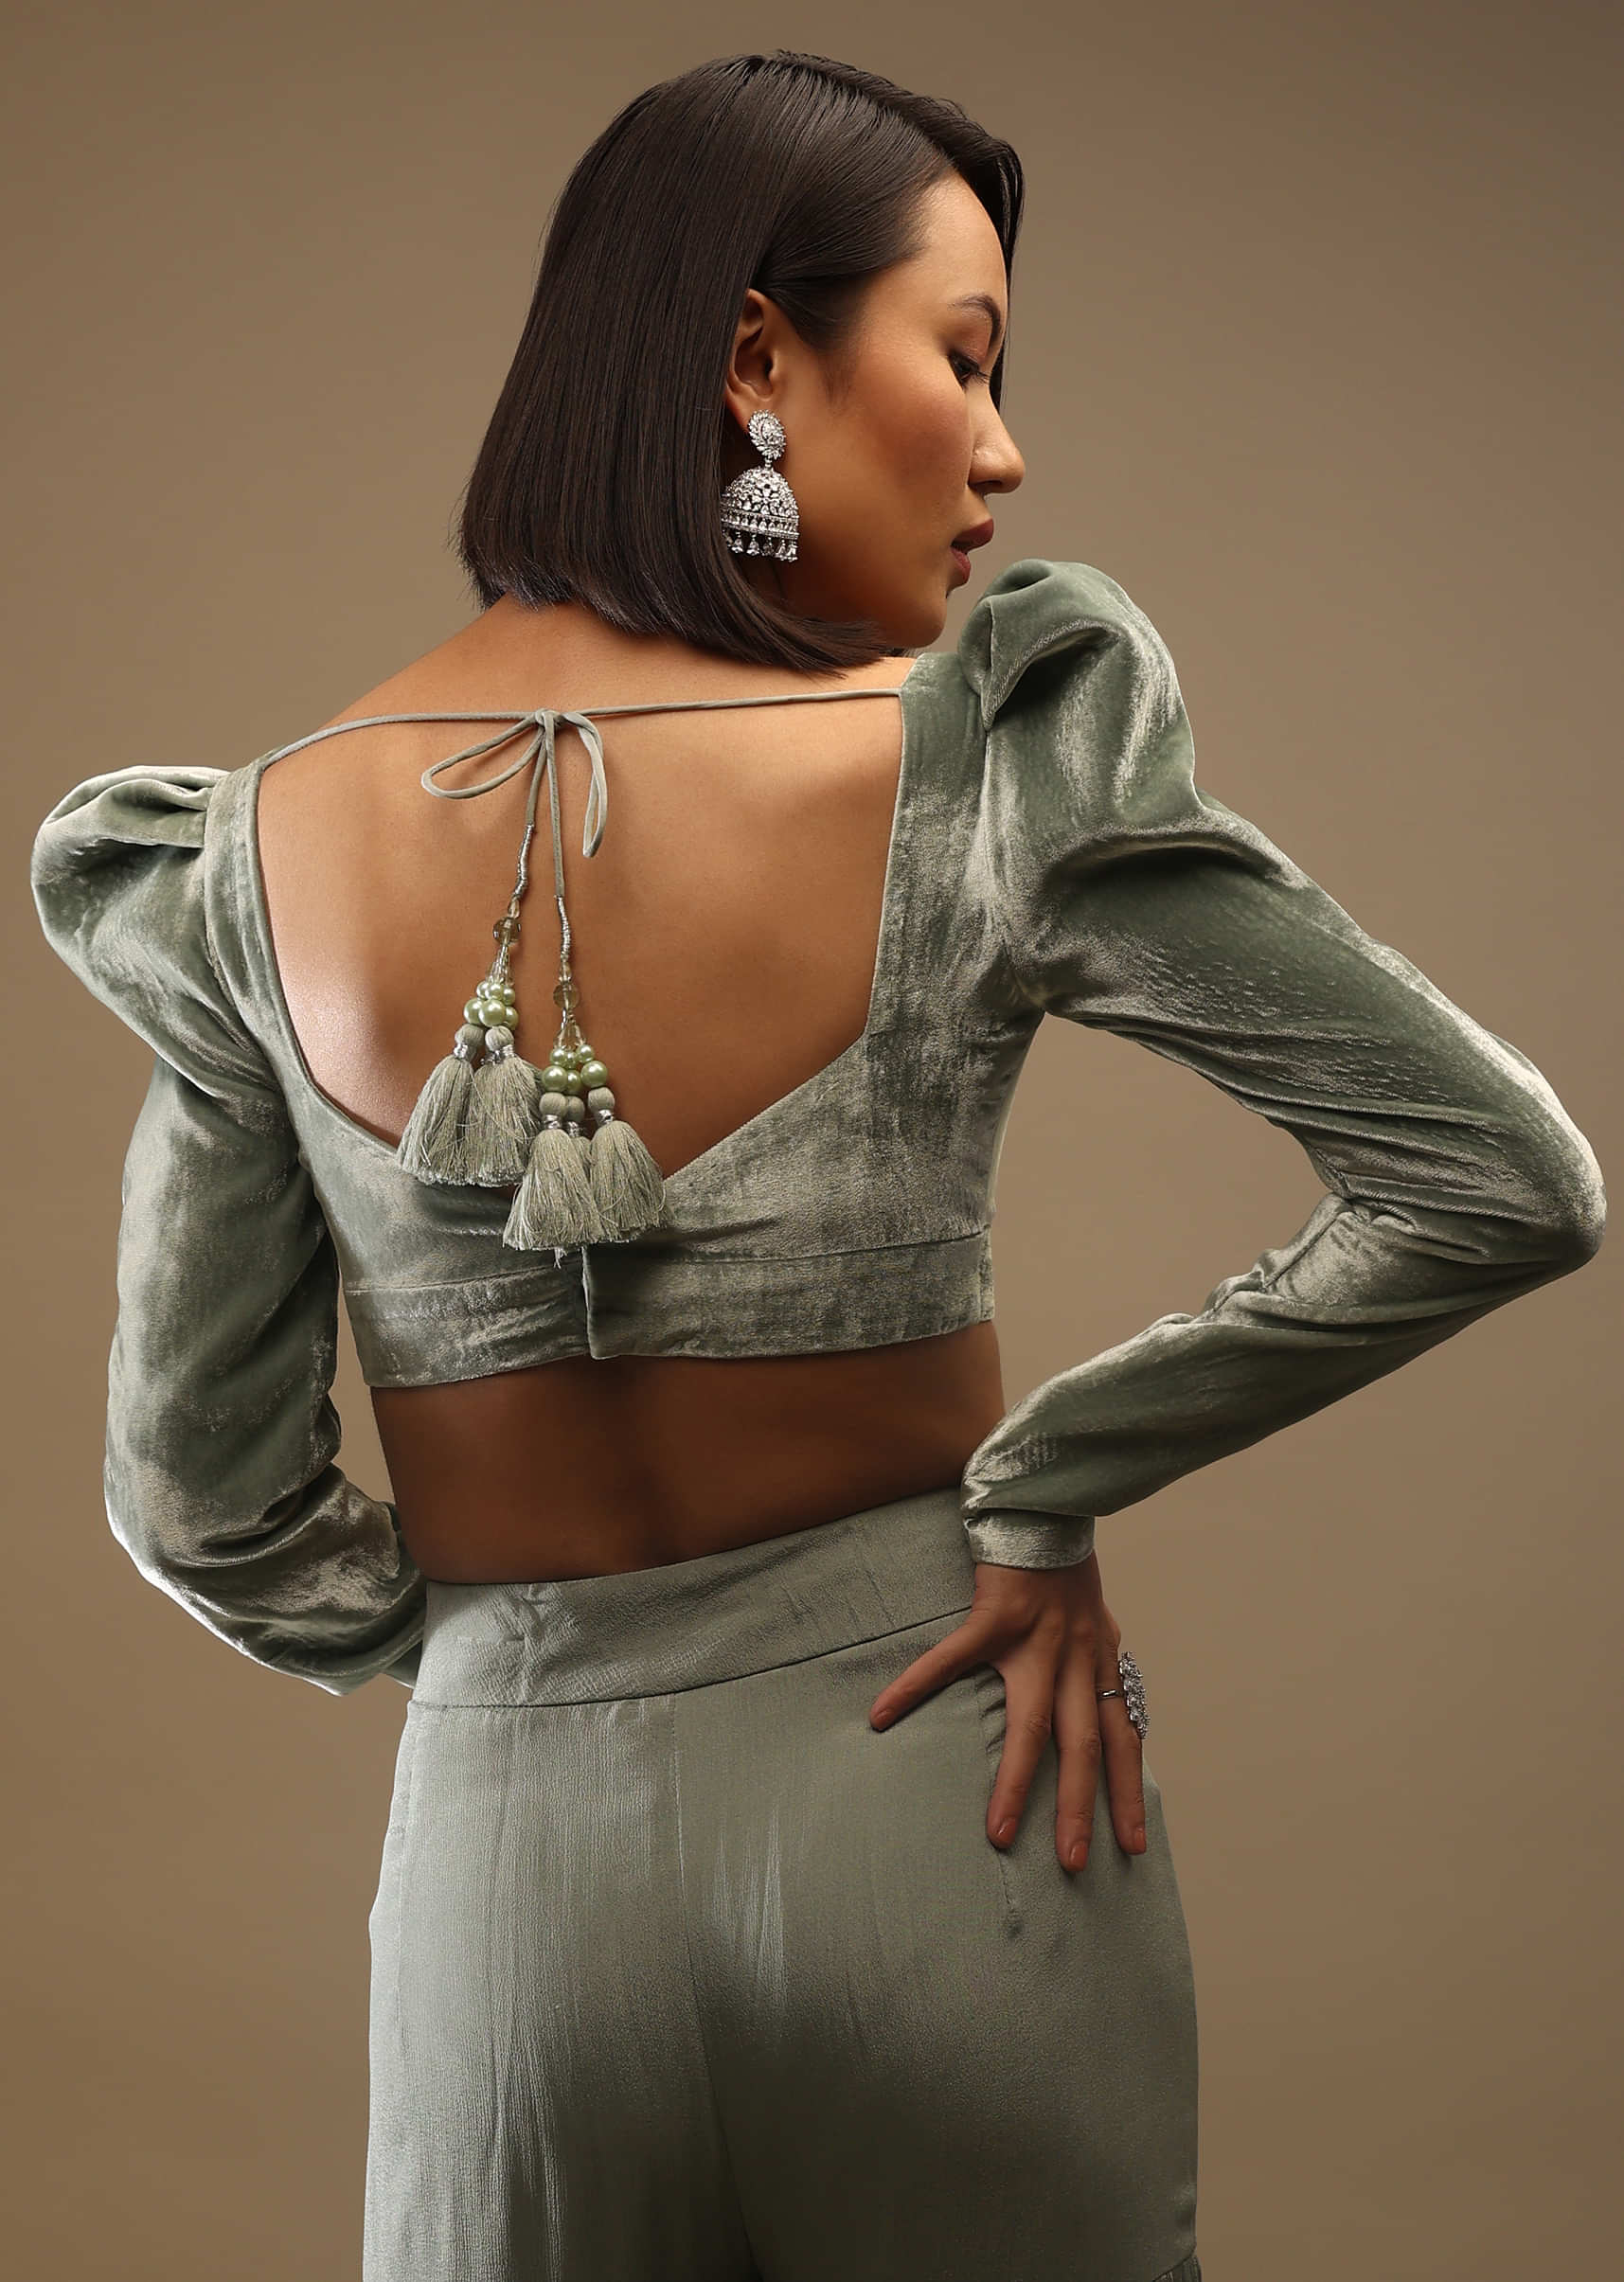 Iceberg Green Velvet Full Sleeves Blouse With A Plunging Neckline Back Hooks Closure With A Tie-Up Tassle Dori  